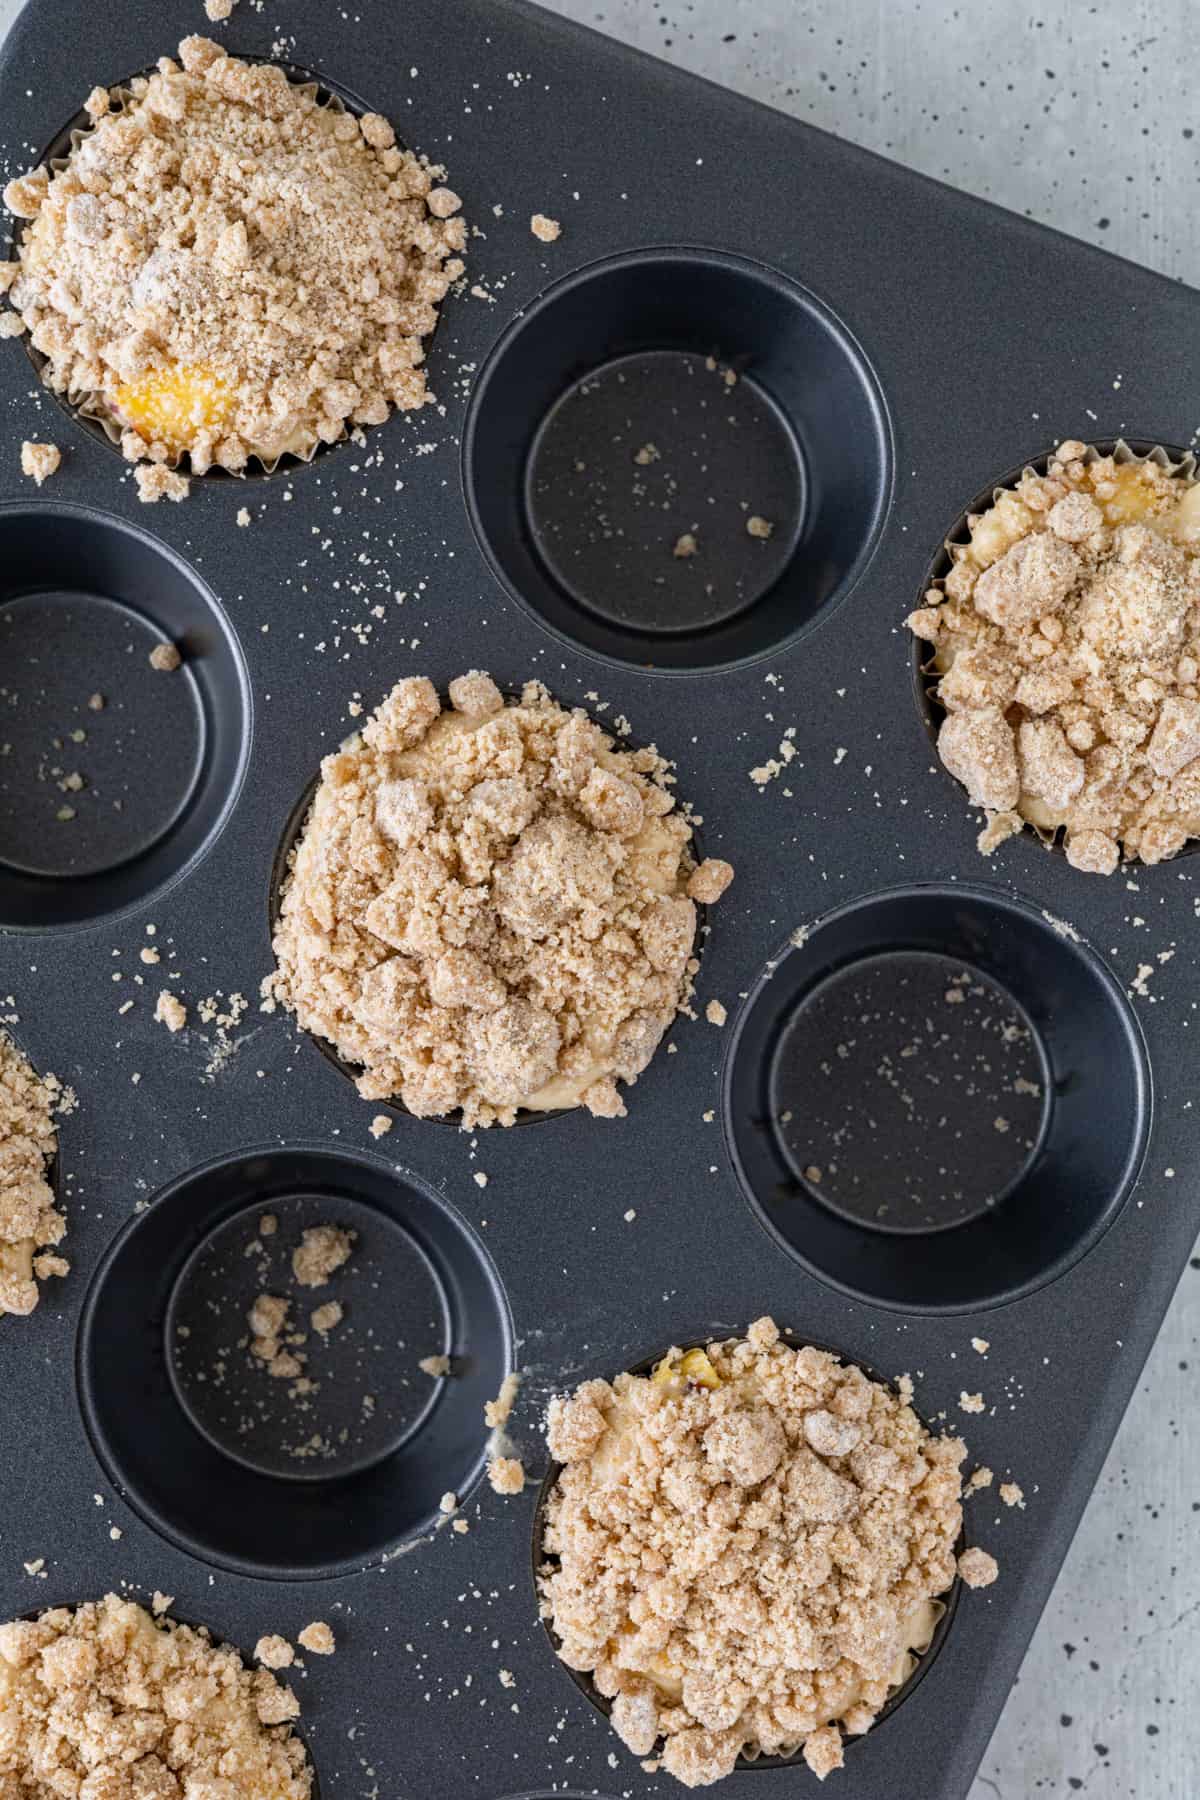 Unbaked muffins in a muffin pan.